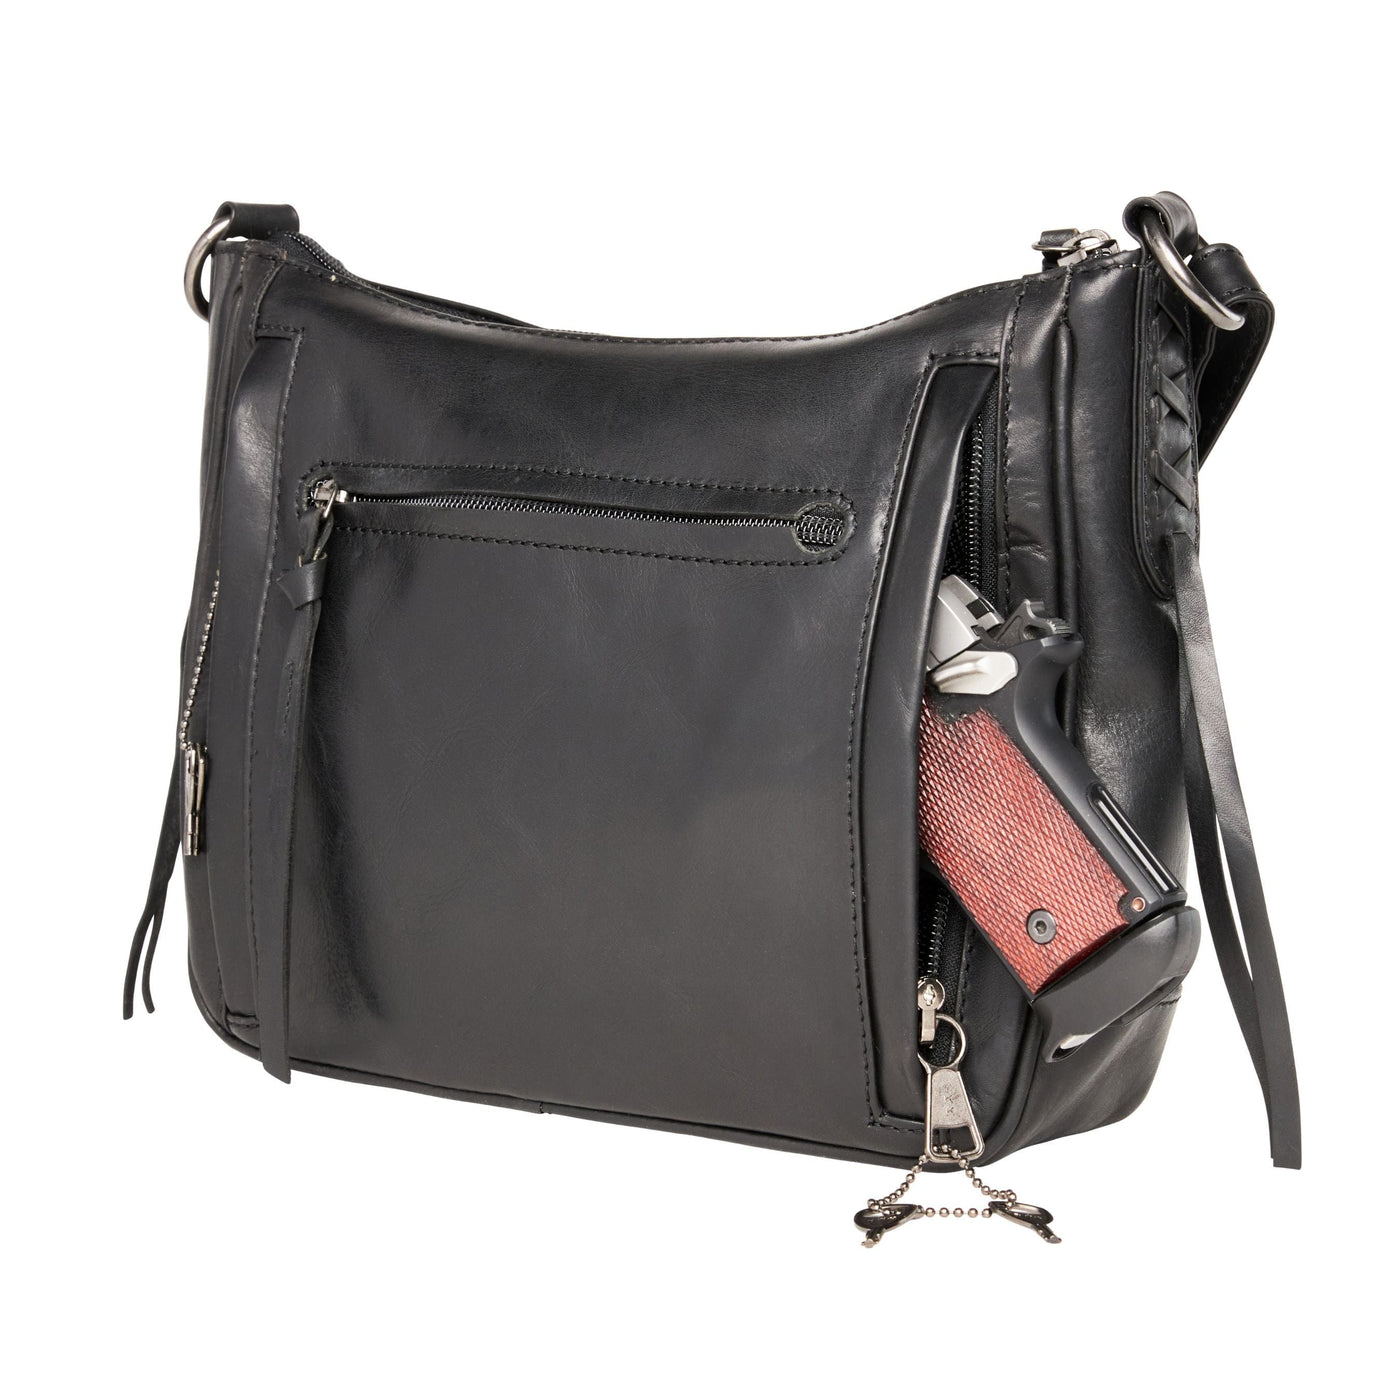 Concealed Carry Callie Leather Crossbody - YKK Locking Bag Black with Universal Holster for Pistol and Guns